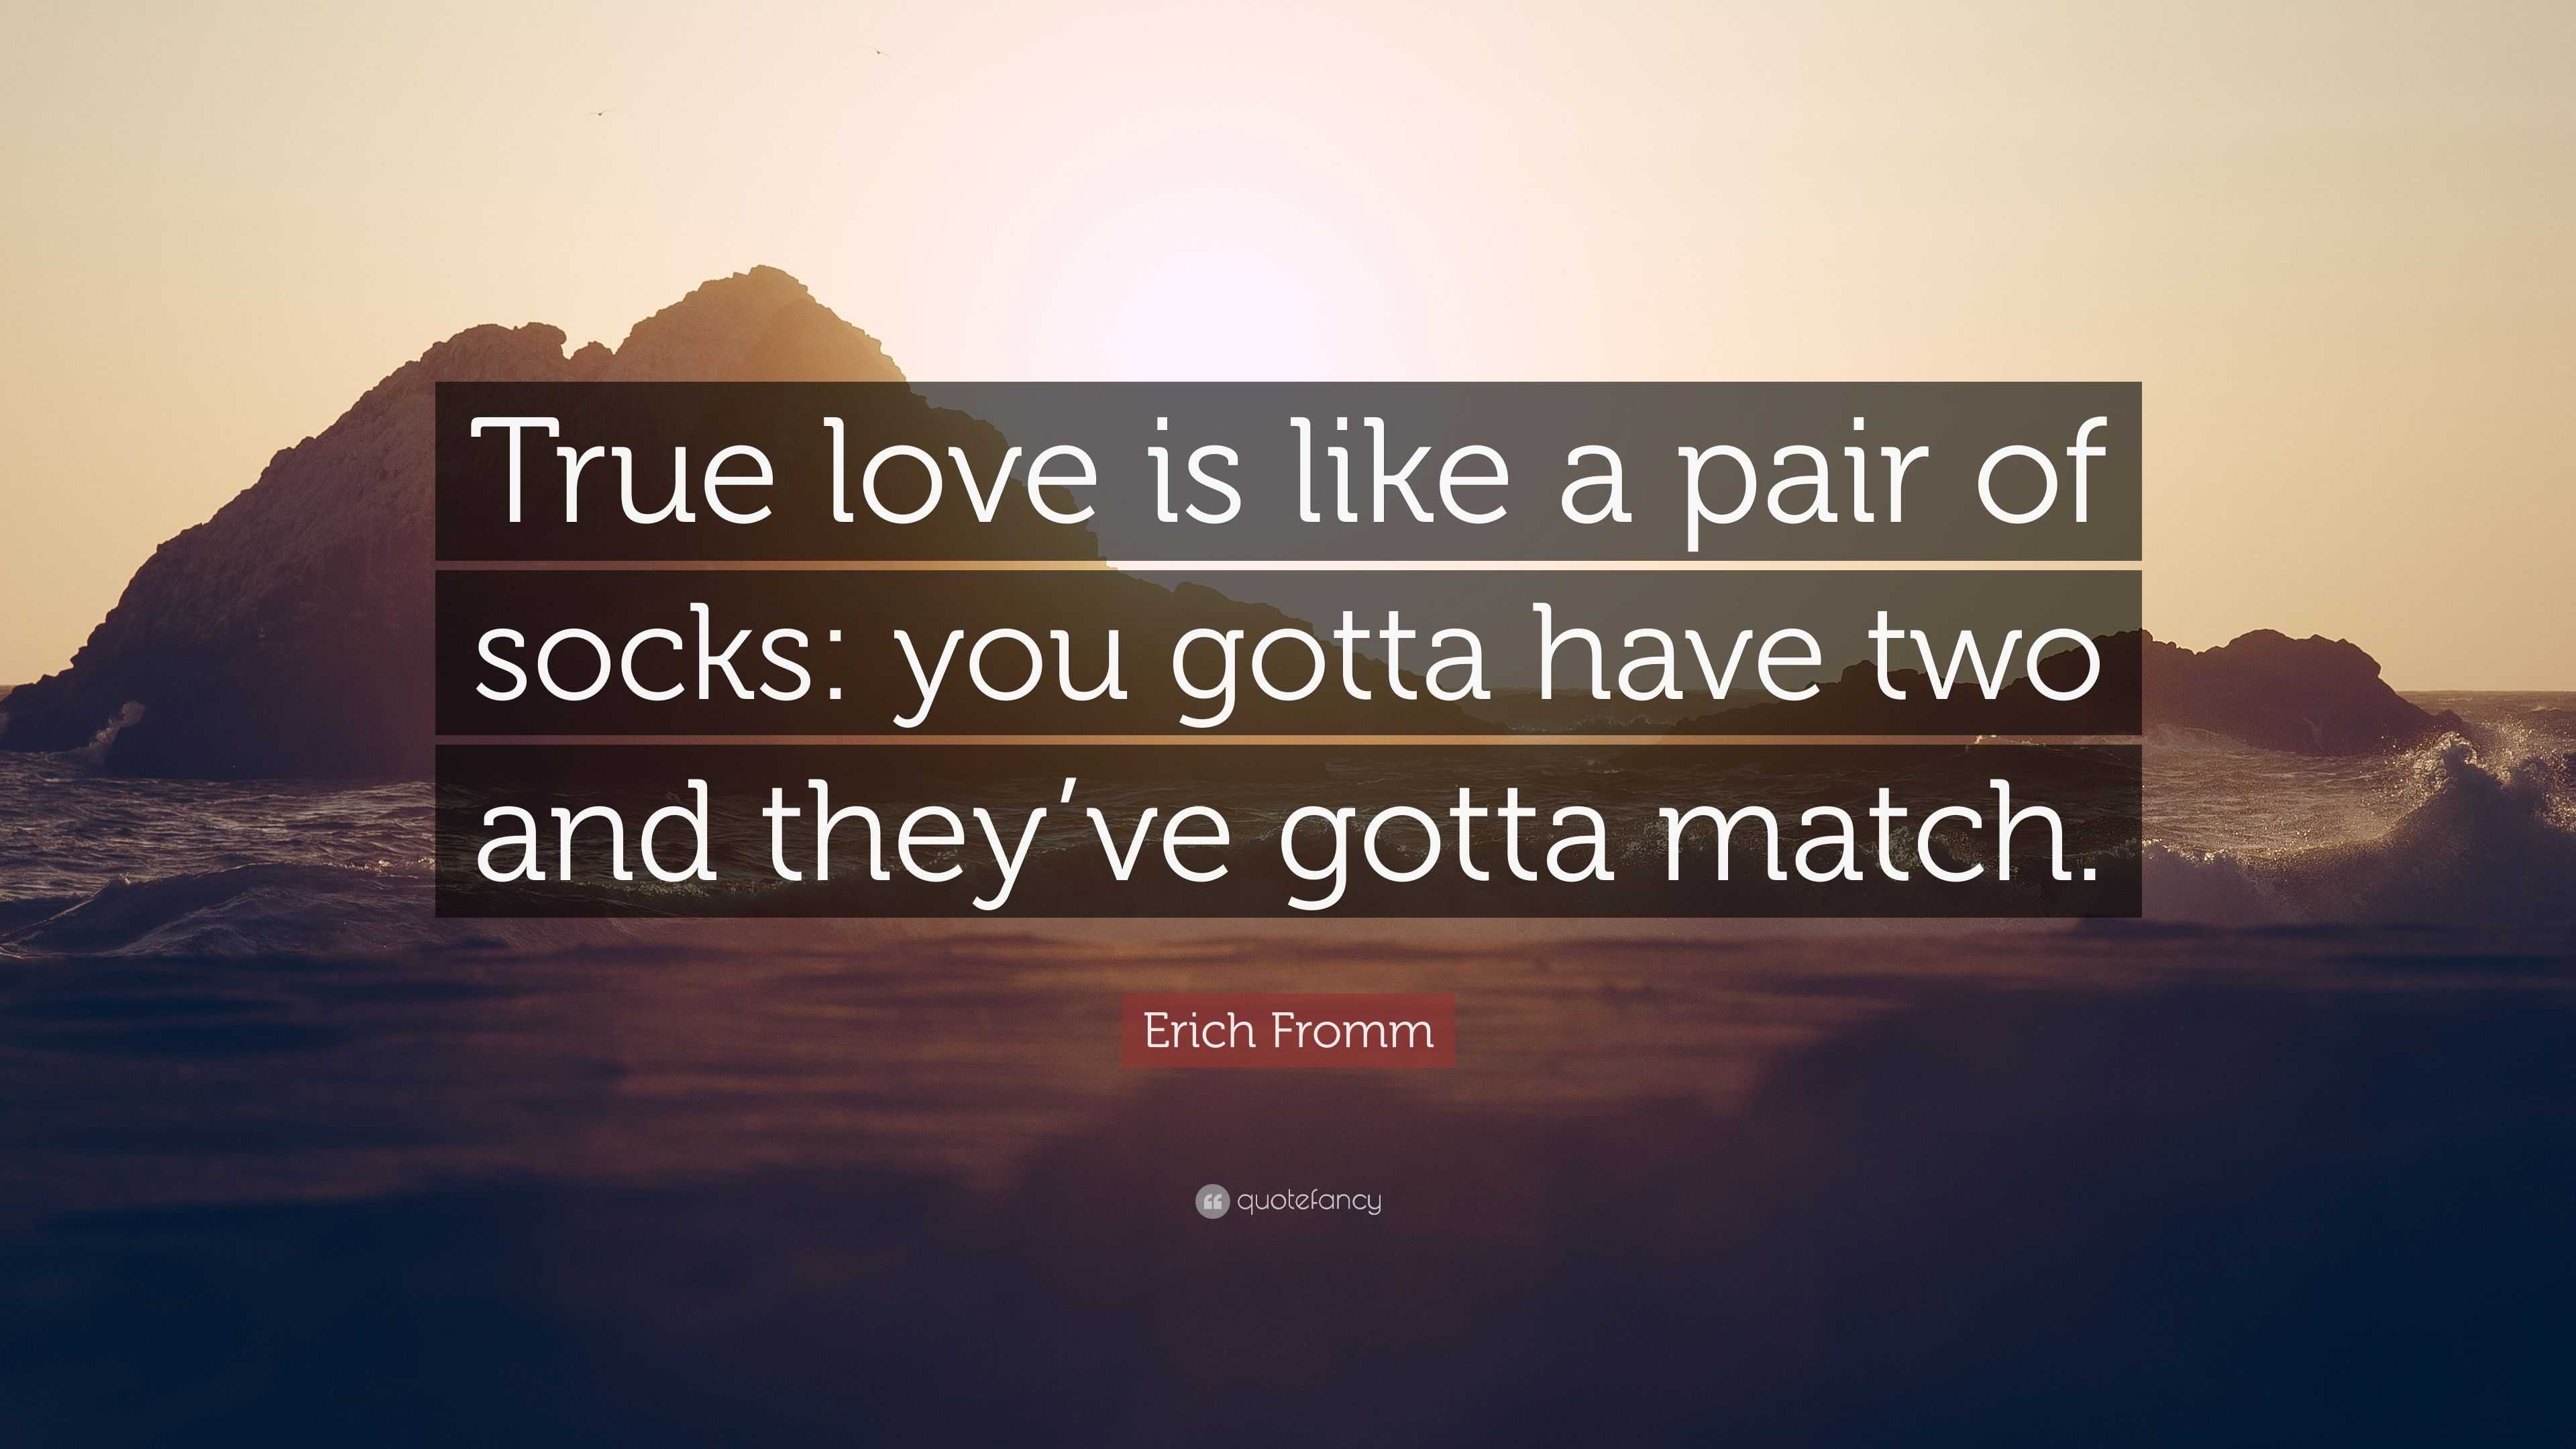 Erich Fromm Quote “True love is like a pair of socks you gotta